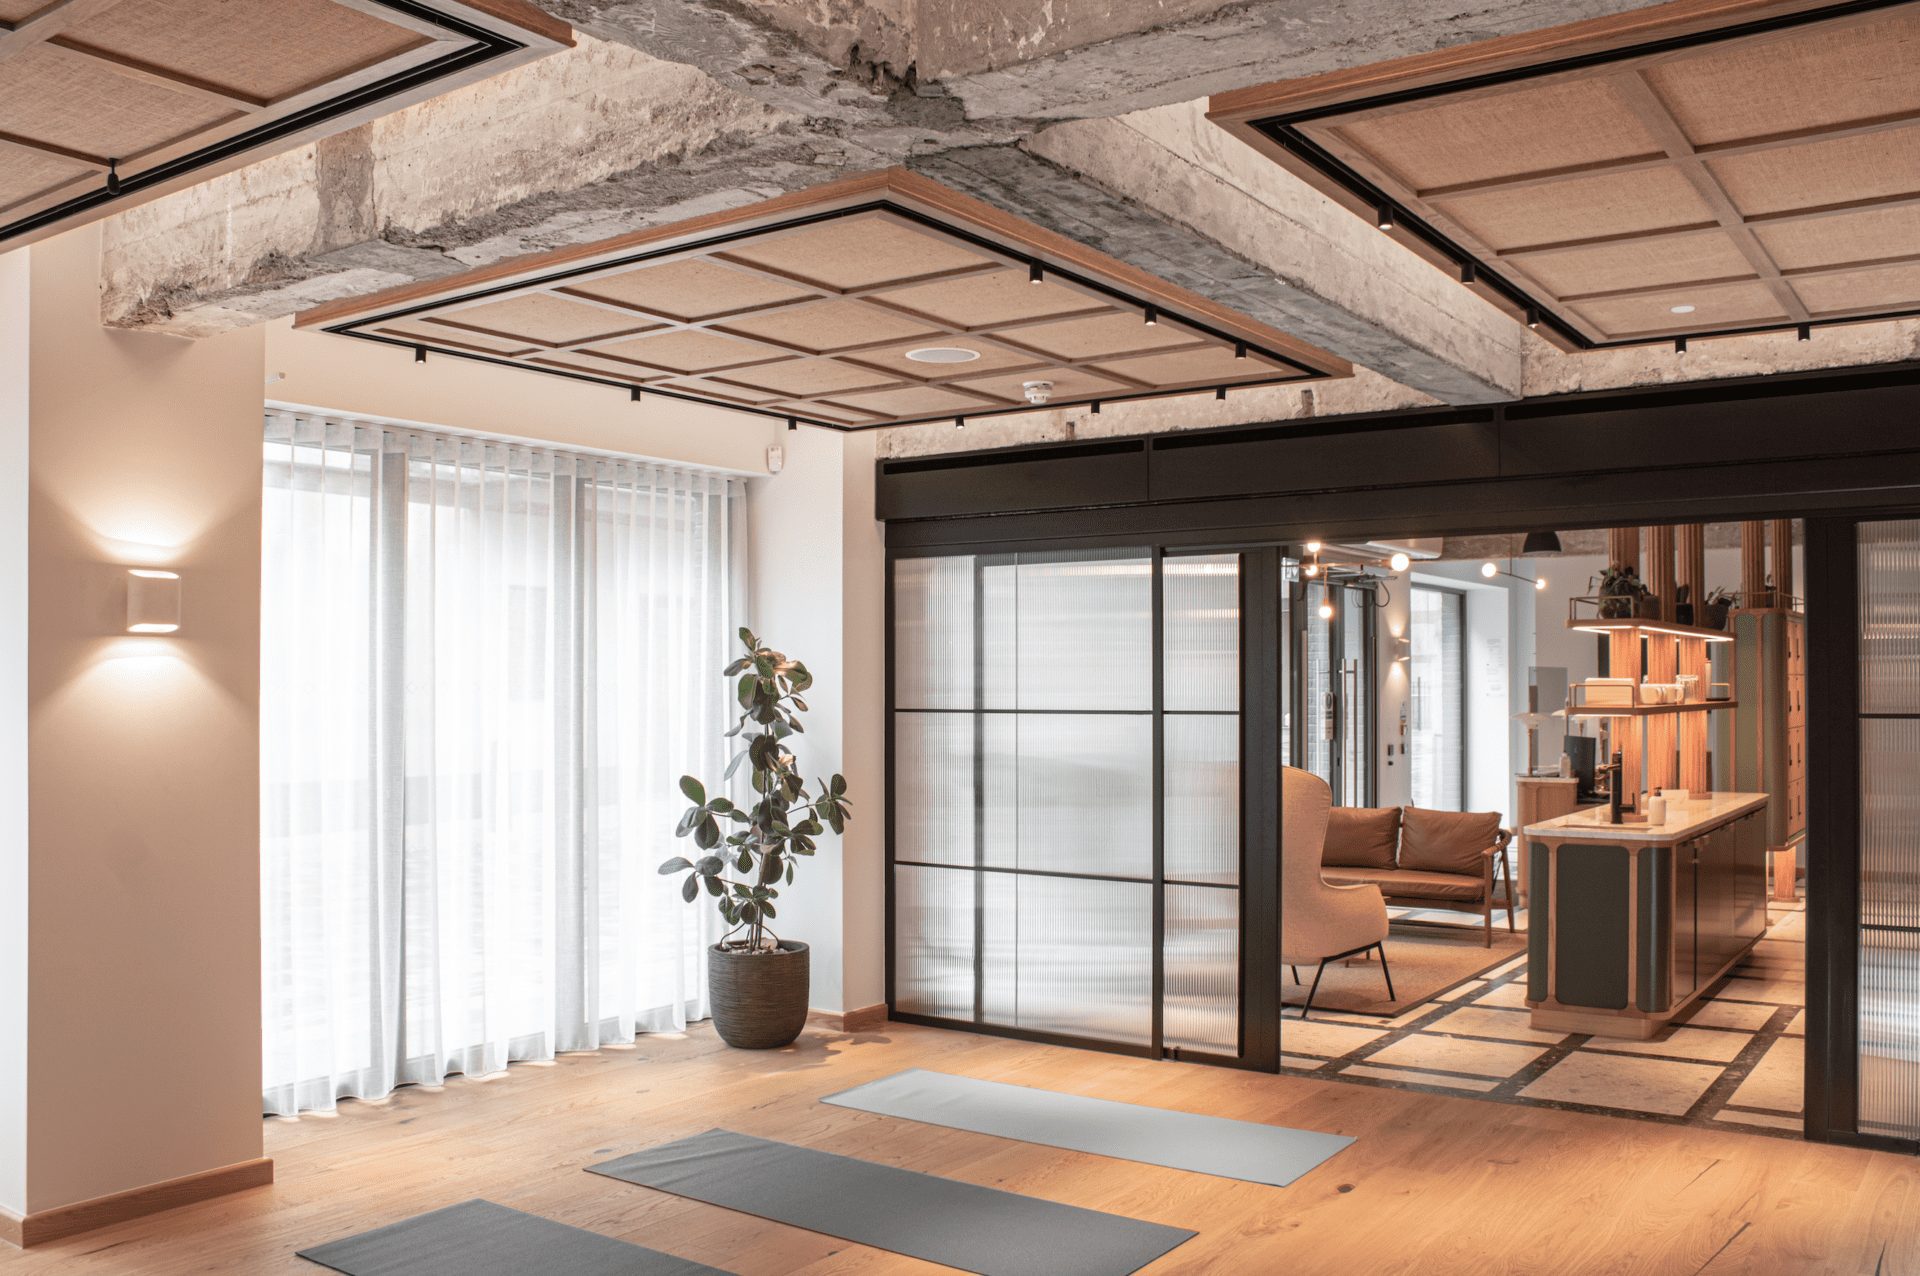 fathom architects, london, workplace wellbeing, office interior, 6 babmaes street, the crown estate london, OnOffice magazine